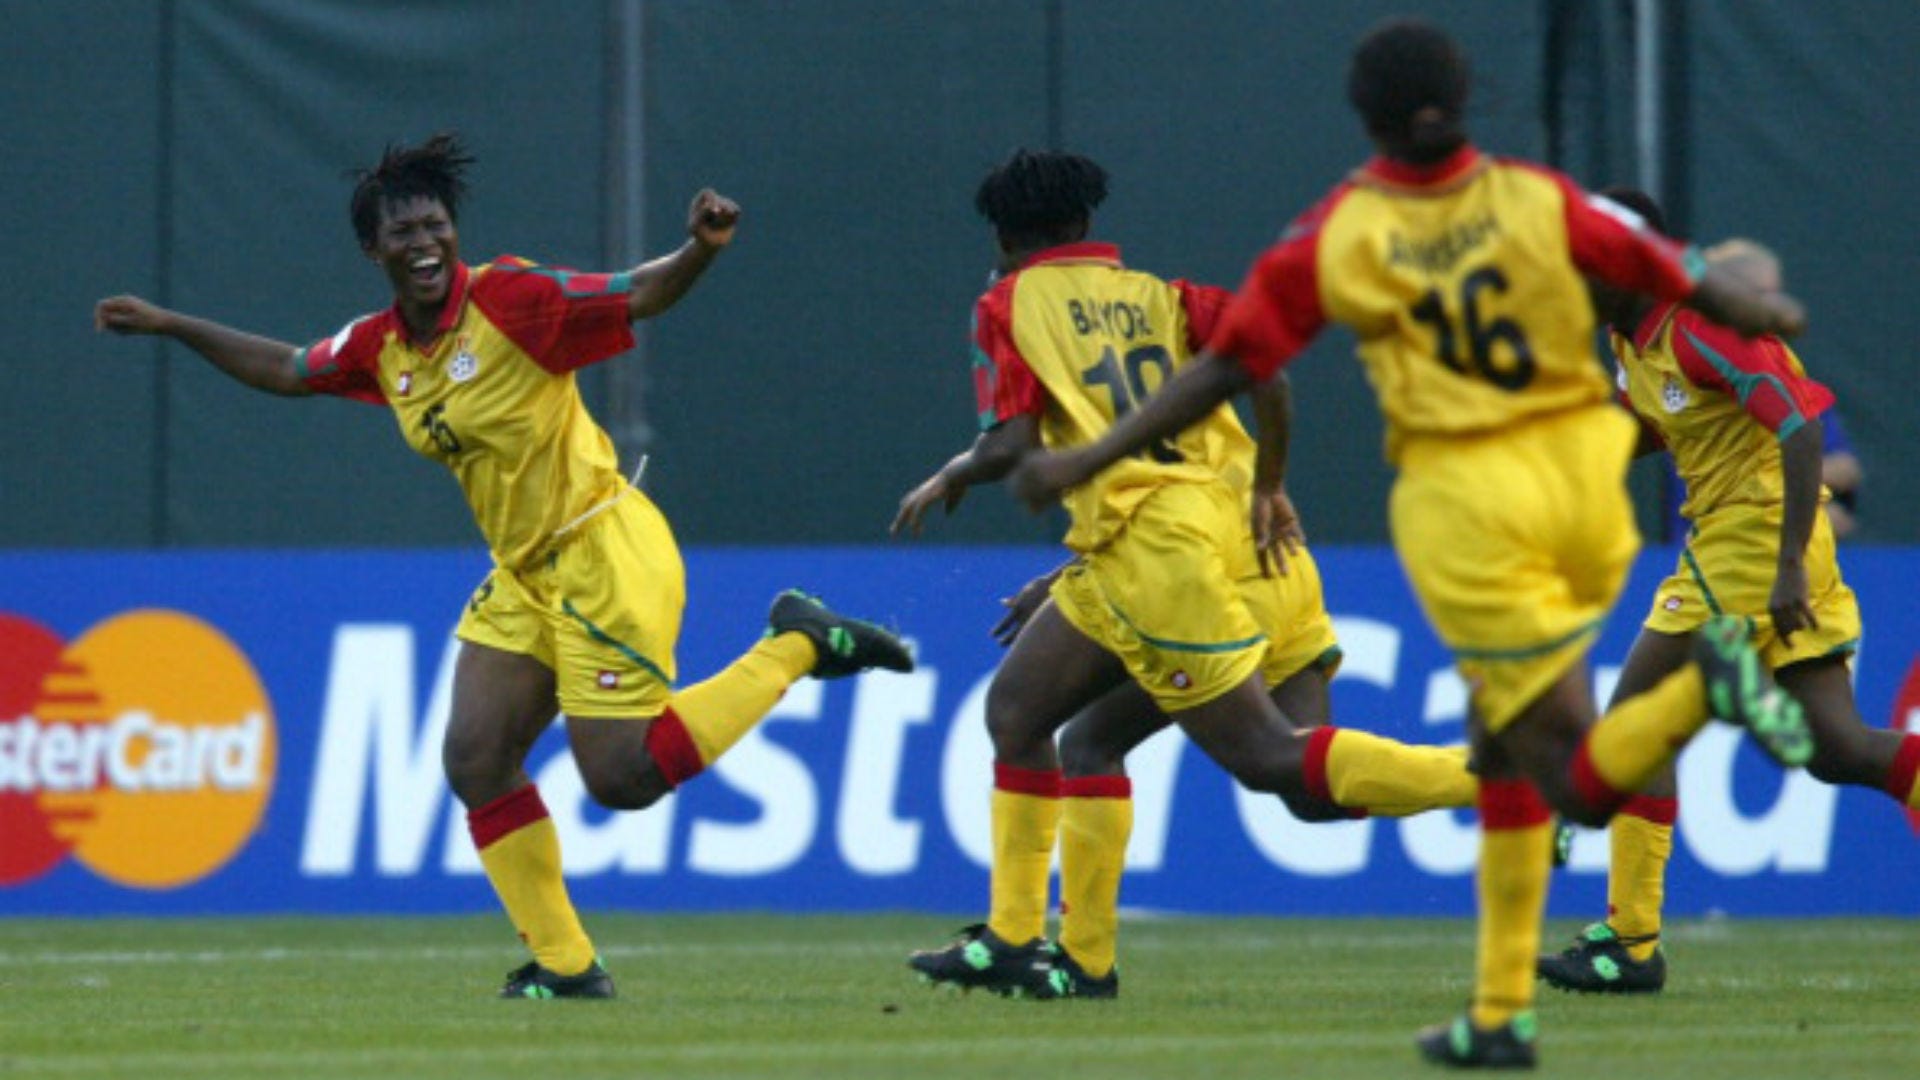 Ghana S Alberta Sackey Nominated For Women S World Cup S Greatest Goal In History Goal Com Malaysia